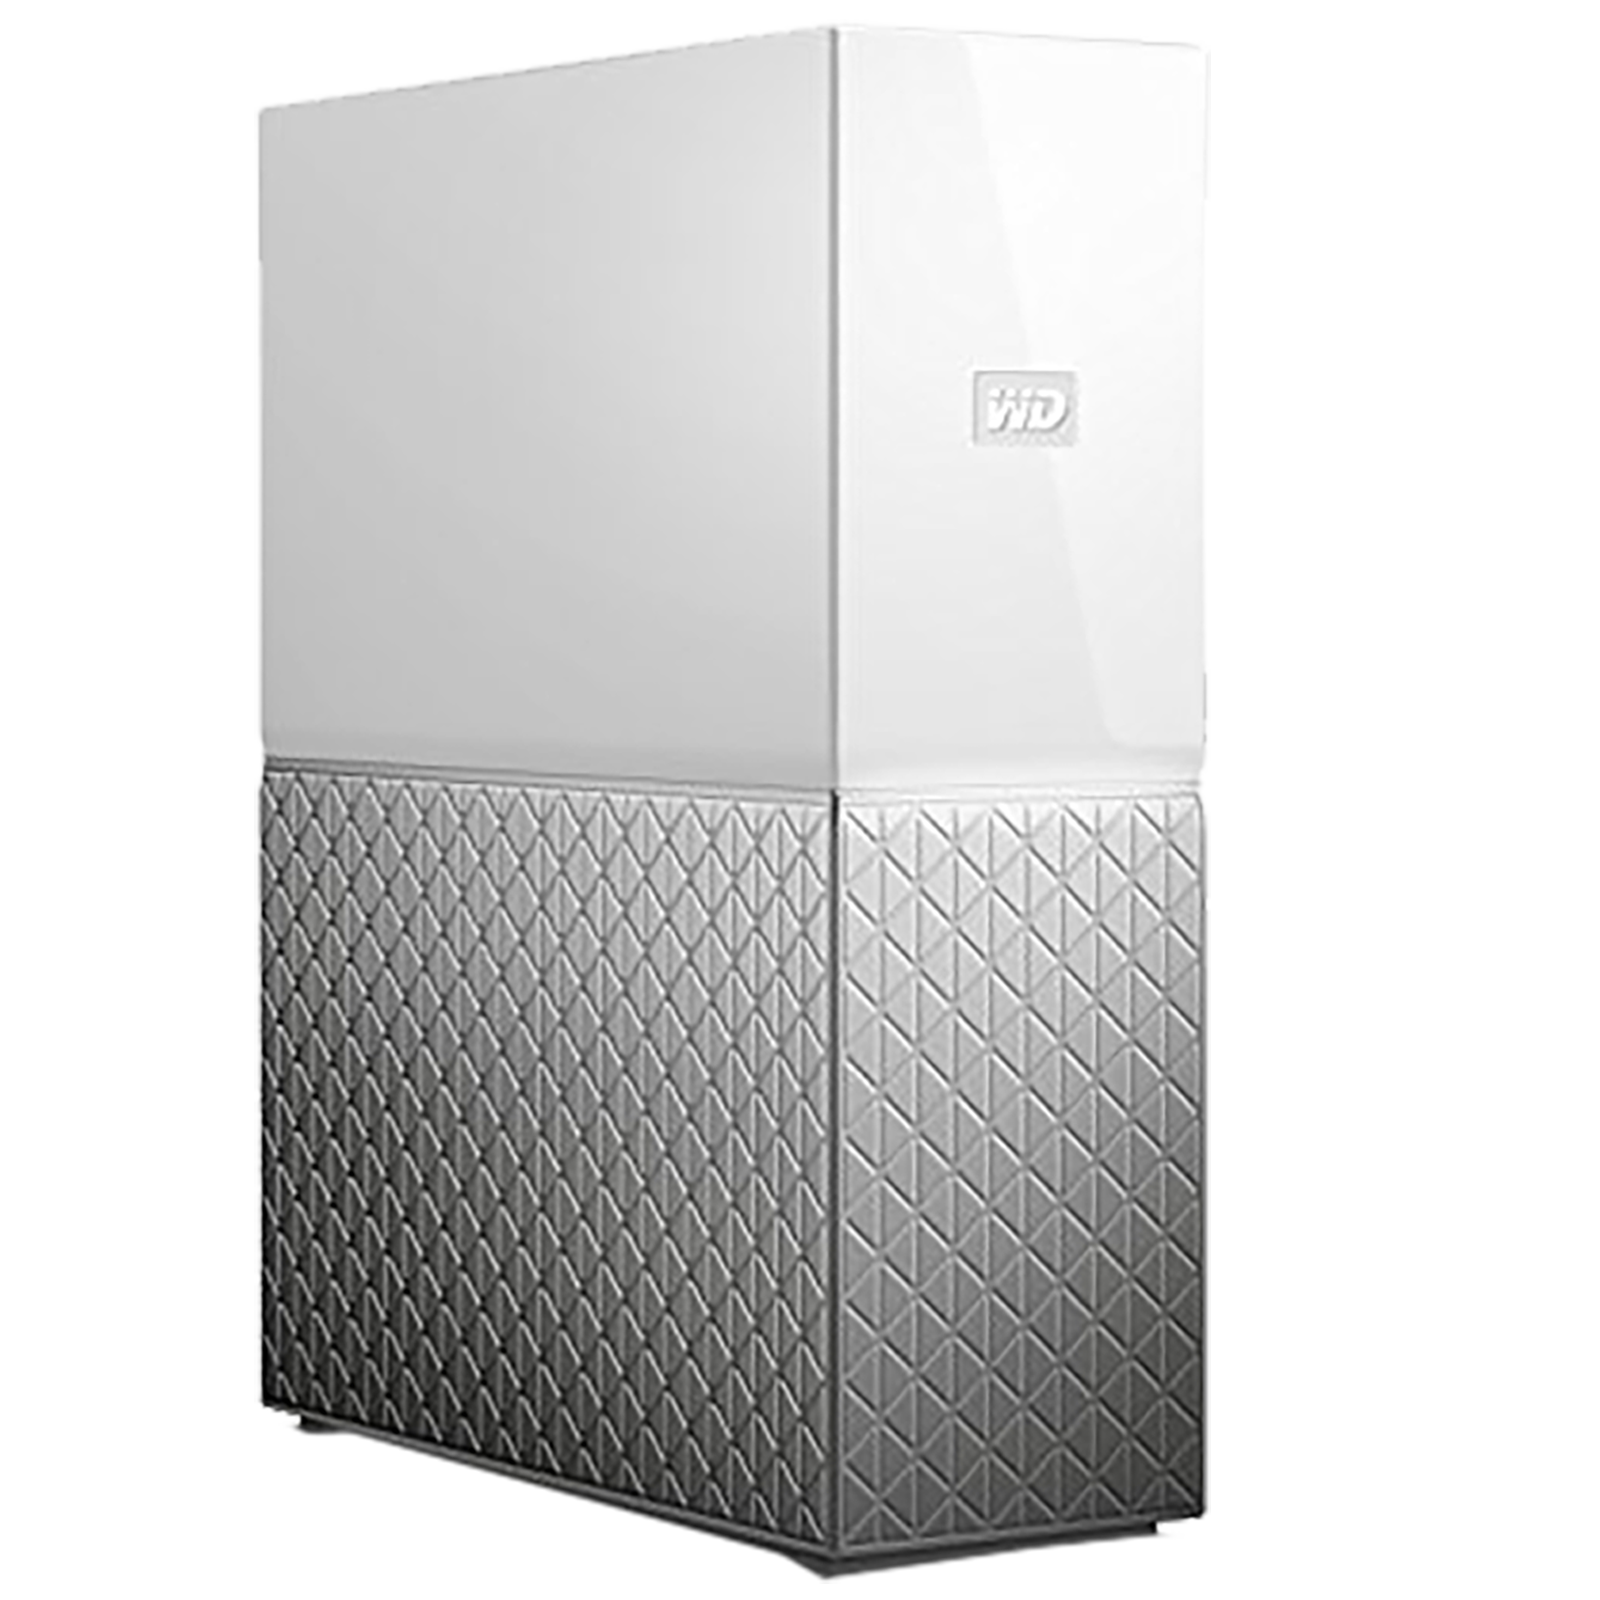 Western Digital My Cloud Home 6 TB USB 3.0 Network Attached Storage (Automatic Backup, WDBVXC0060HWT-BESN, White)